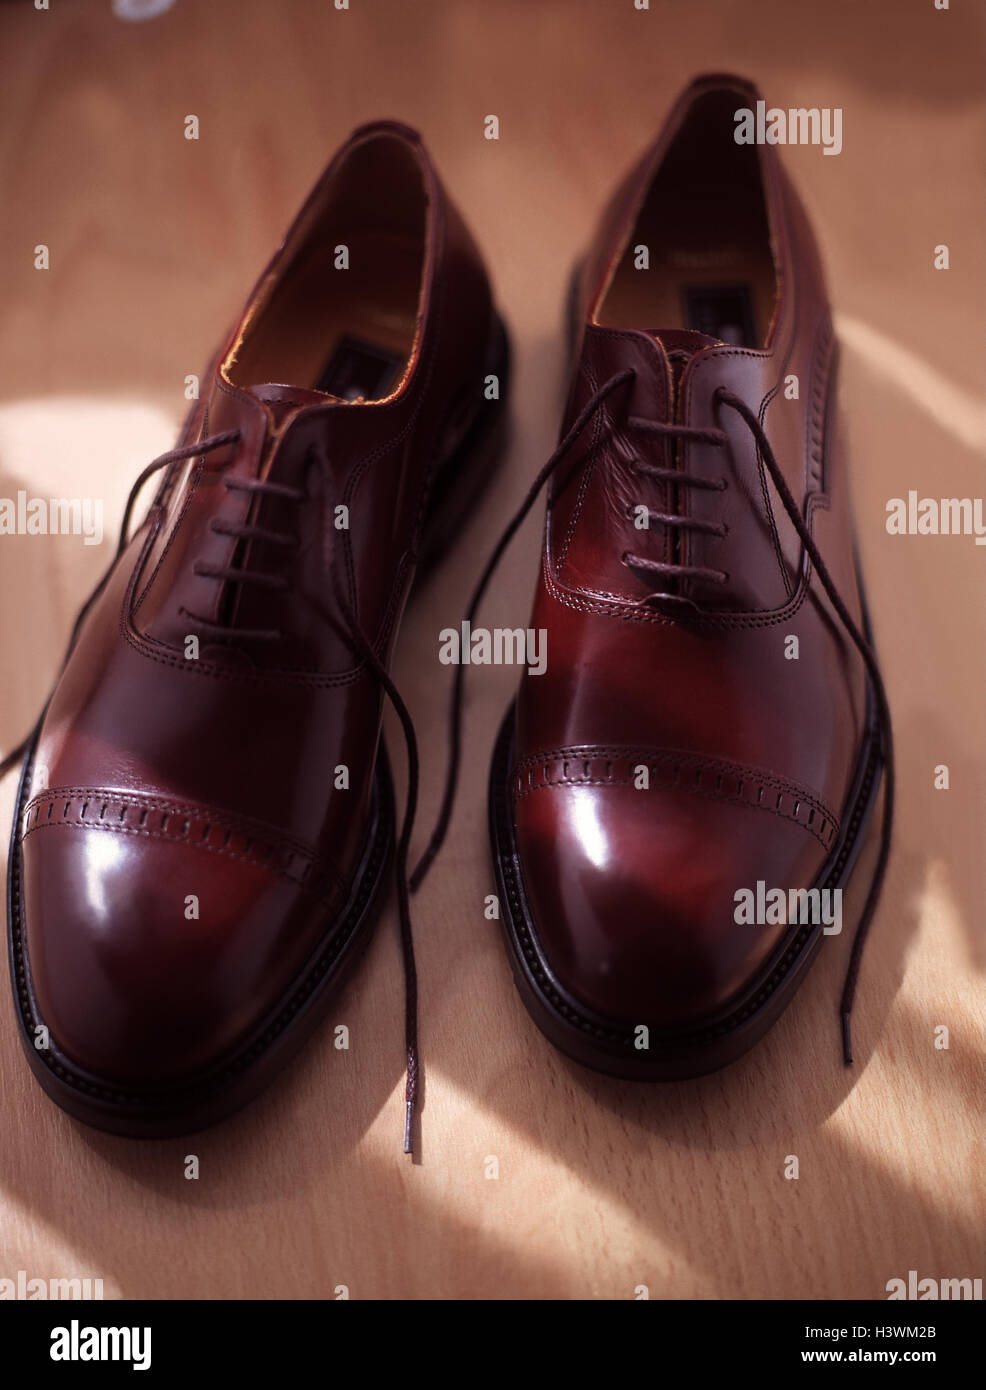 Lord's shoes, leather balls, brown, shoes, two, man's shoes, low shoes,  leather ball shoes, anew, elegantly, Still life, product photography Stock  Photo - Alamy